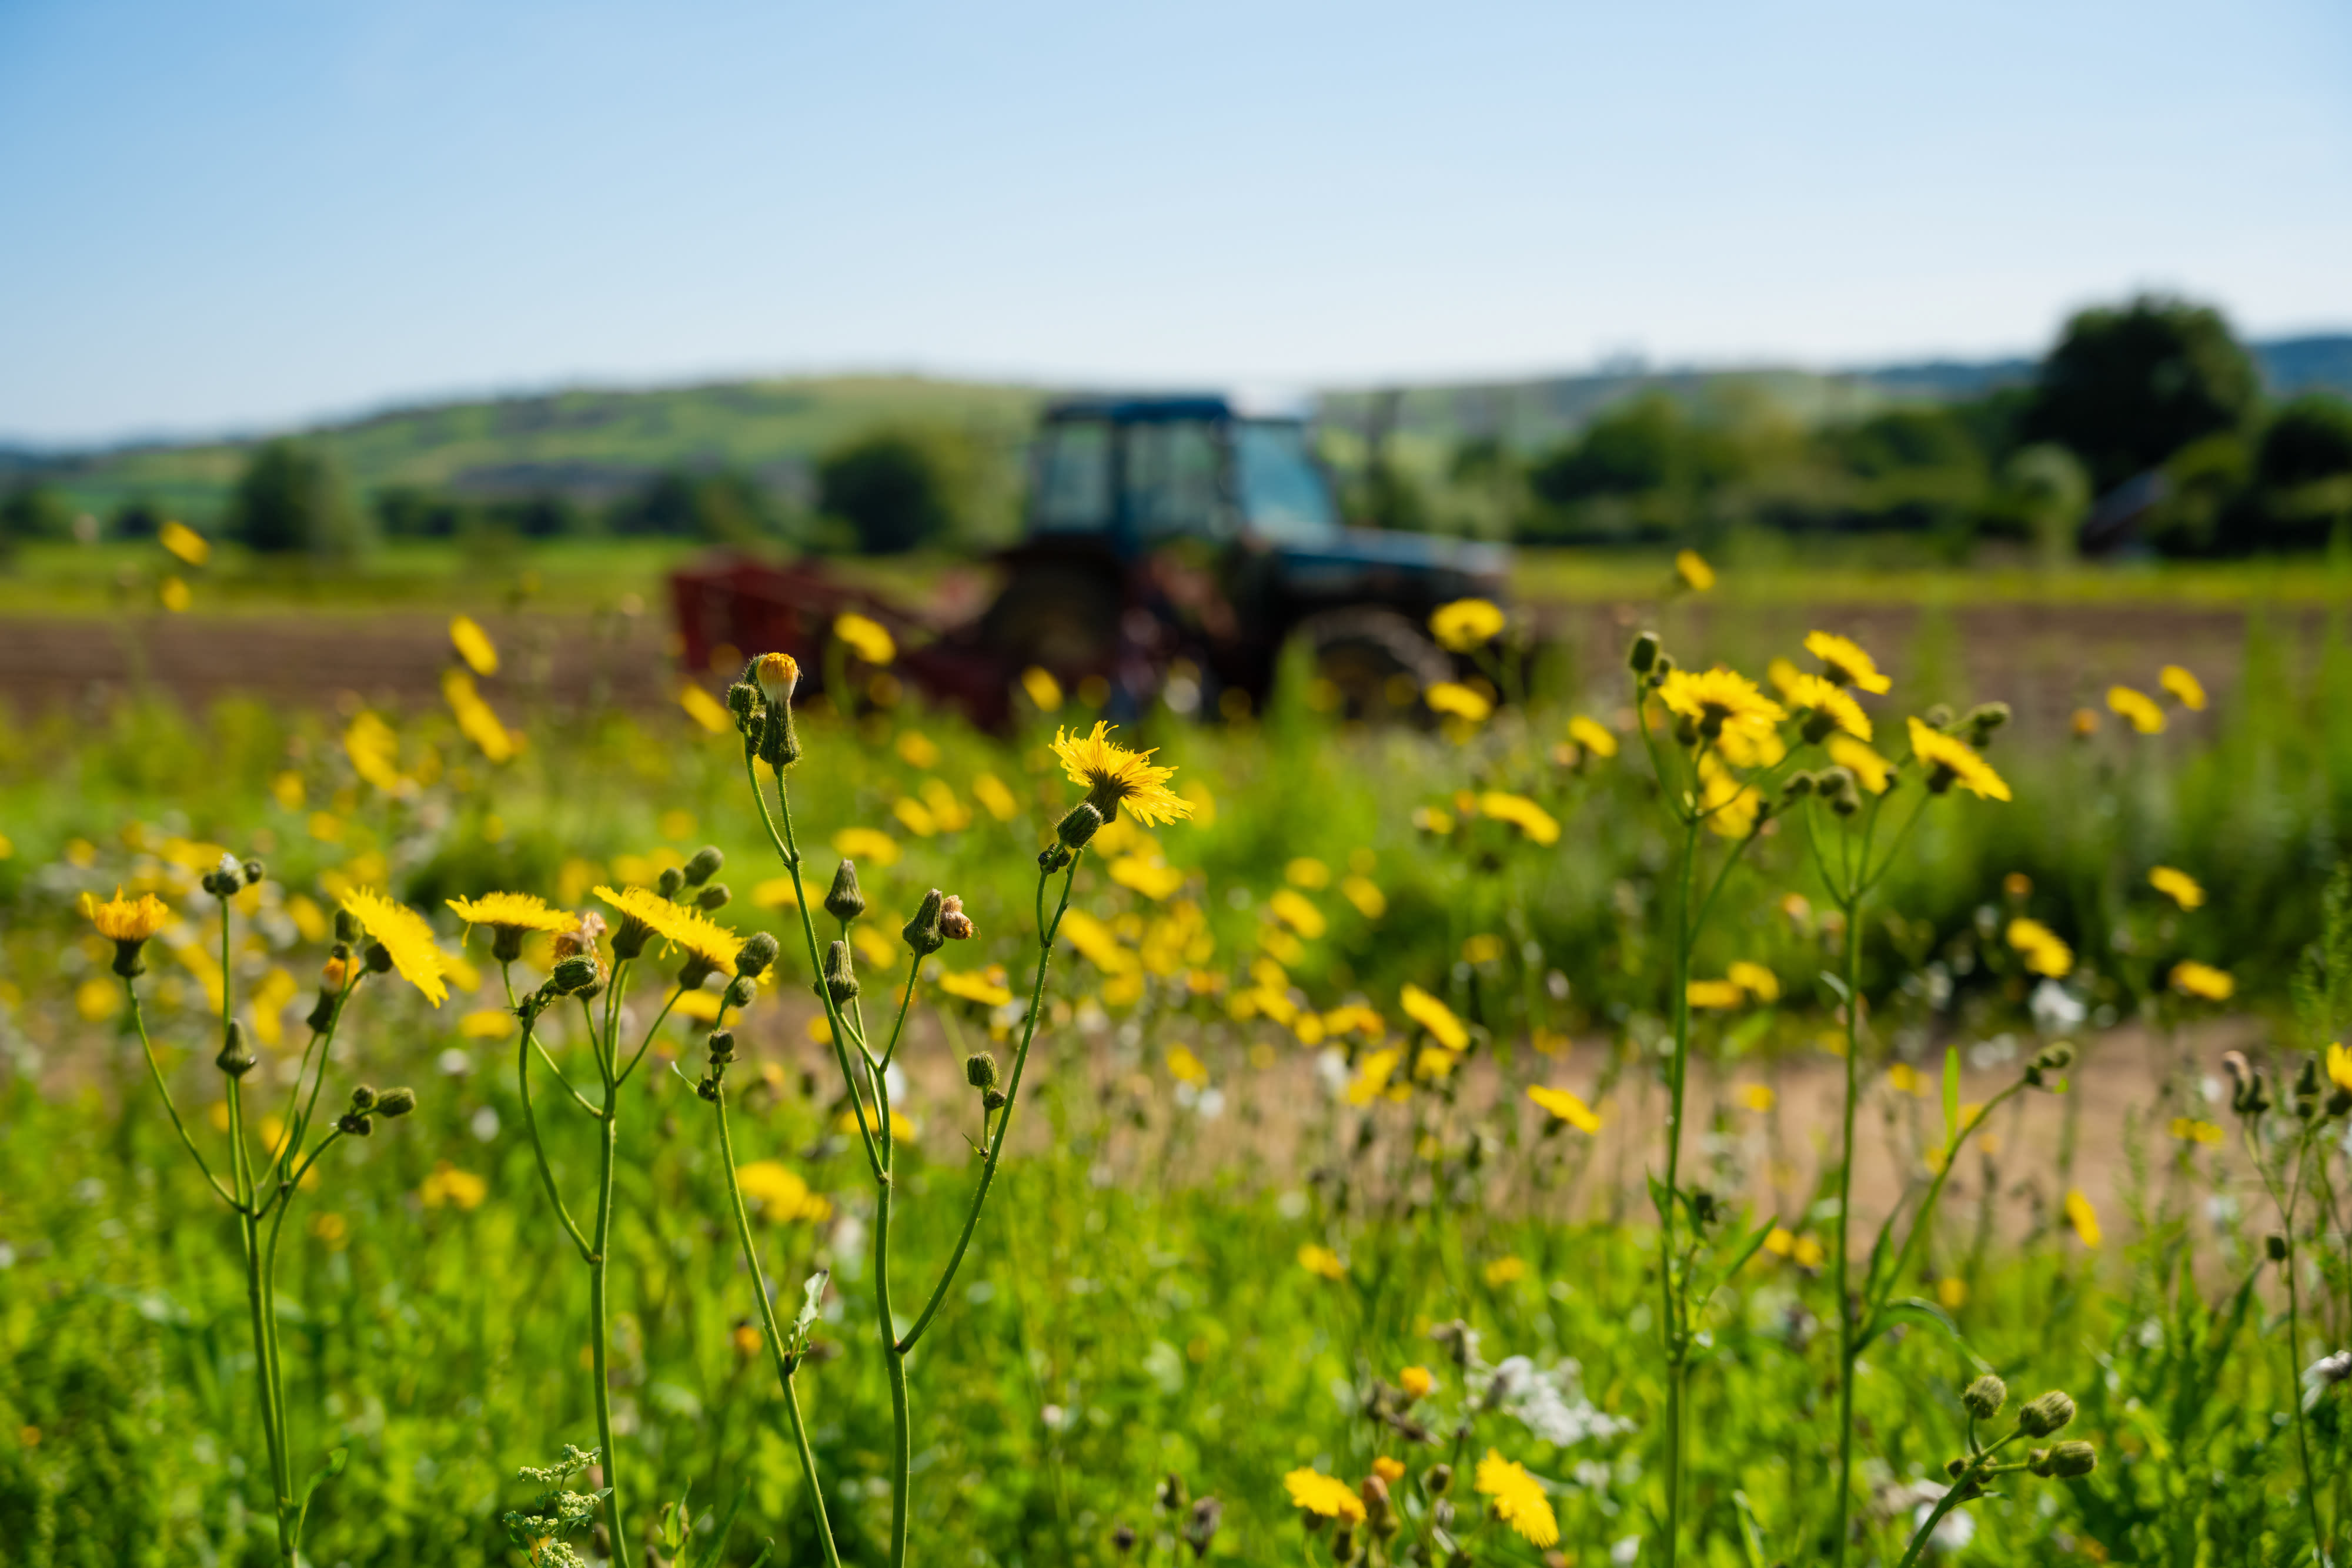 Flowers in field with tractor in background